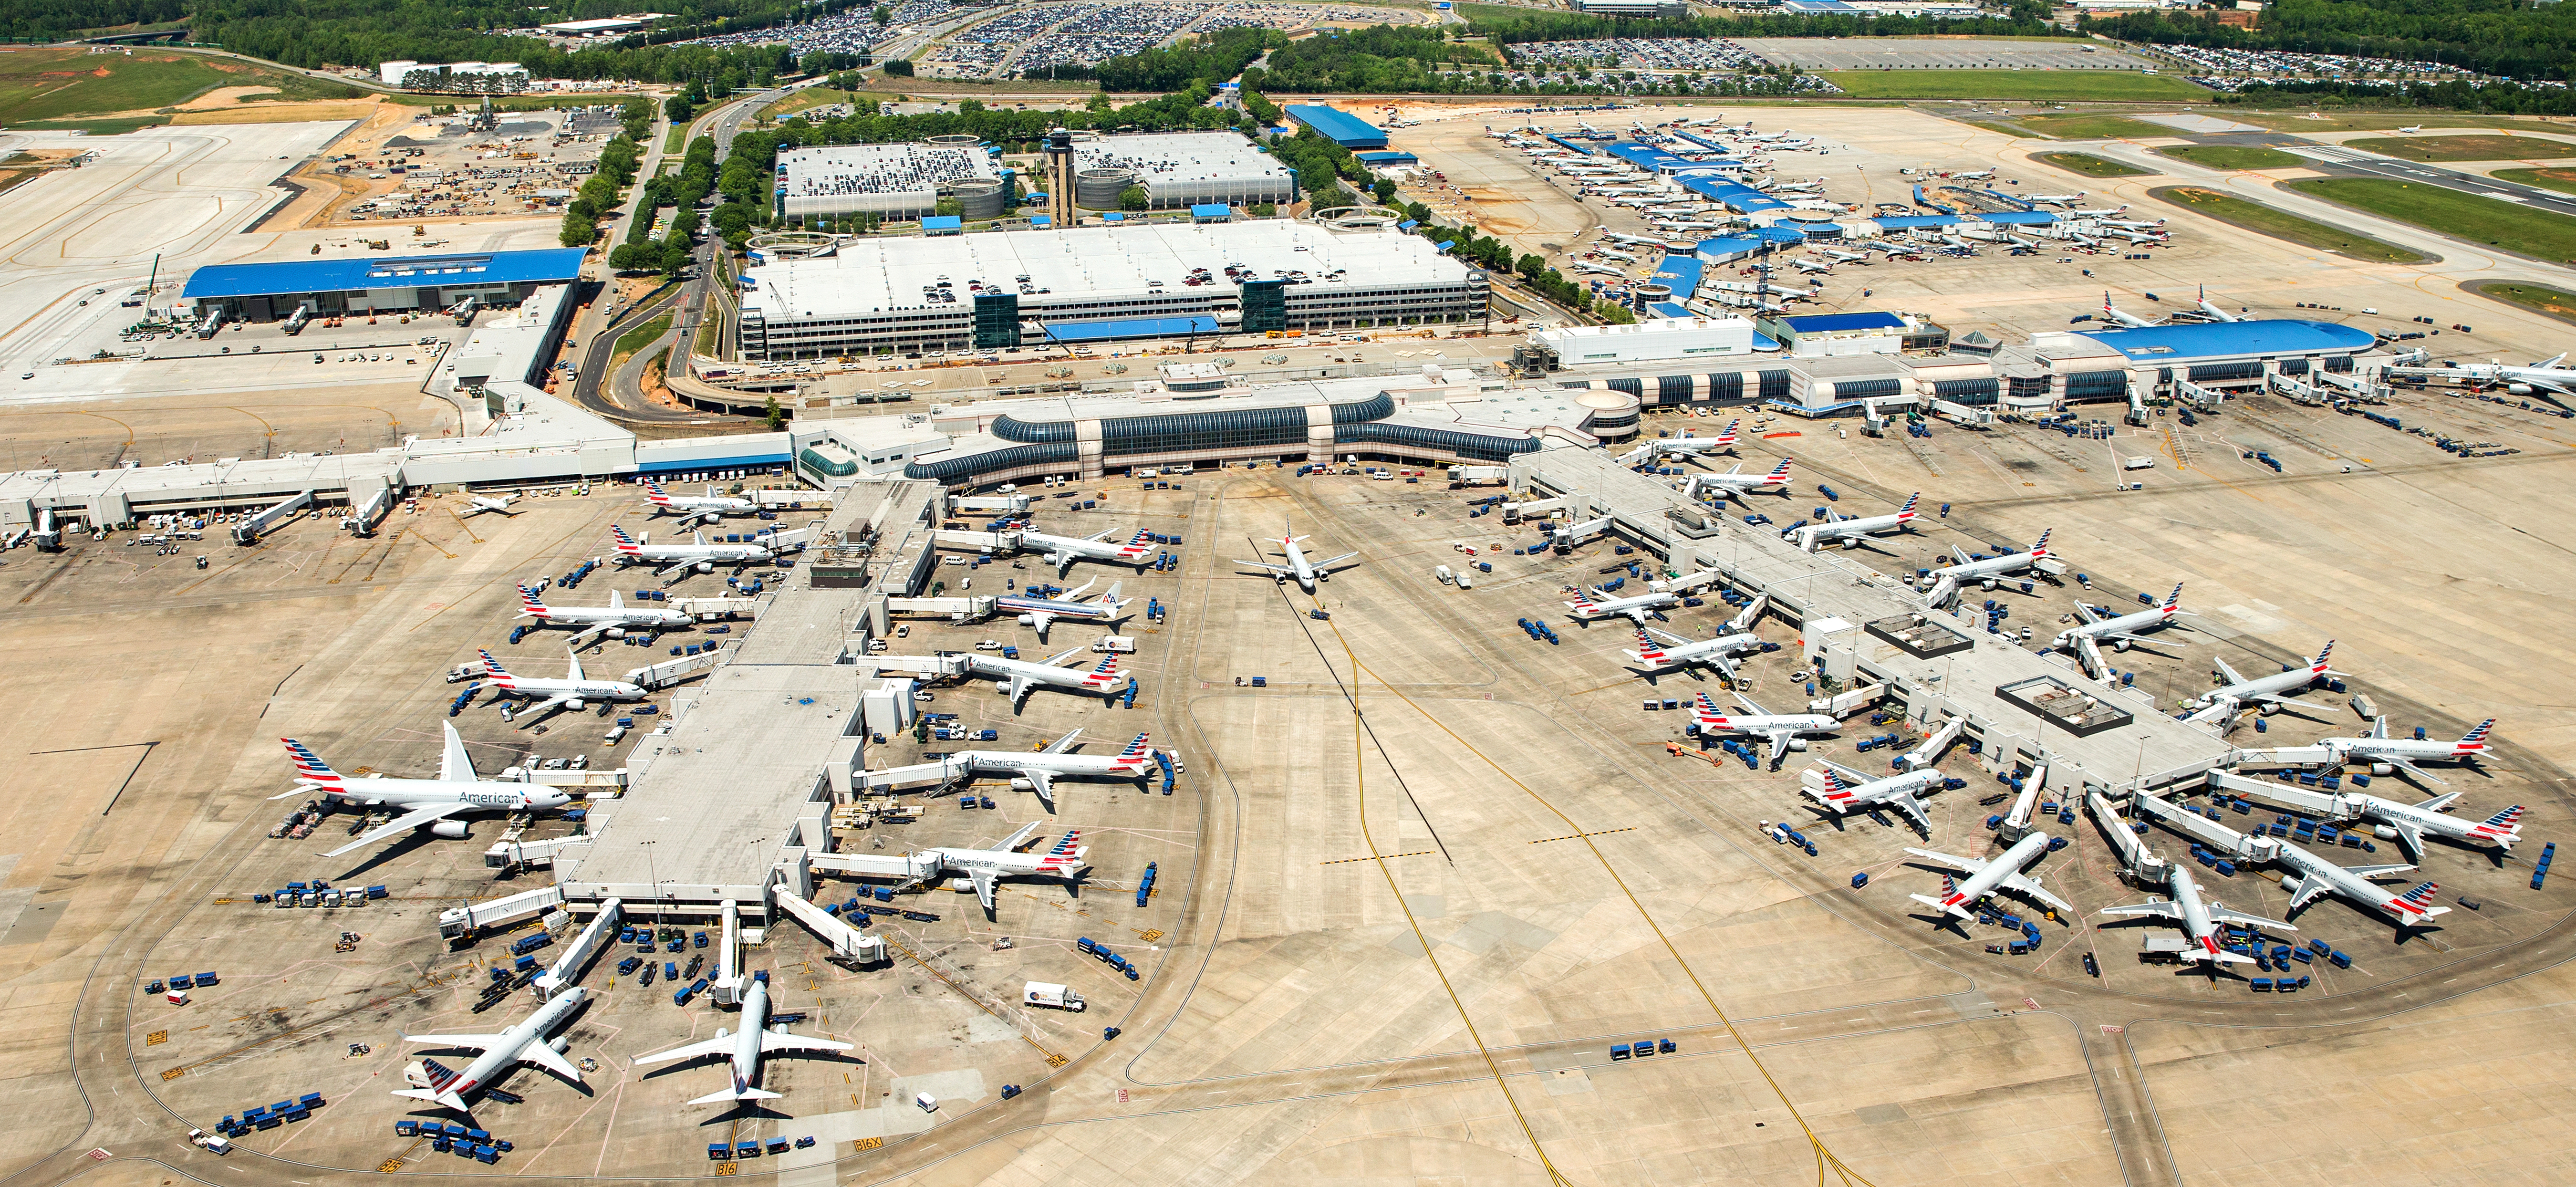 Aerial shot of the outside view of CLT airport concourses, planes are parked at various gates preparing for landing or take off.